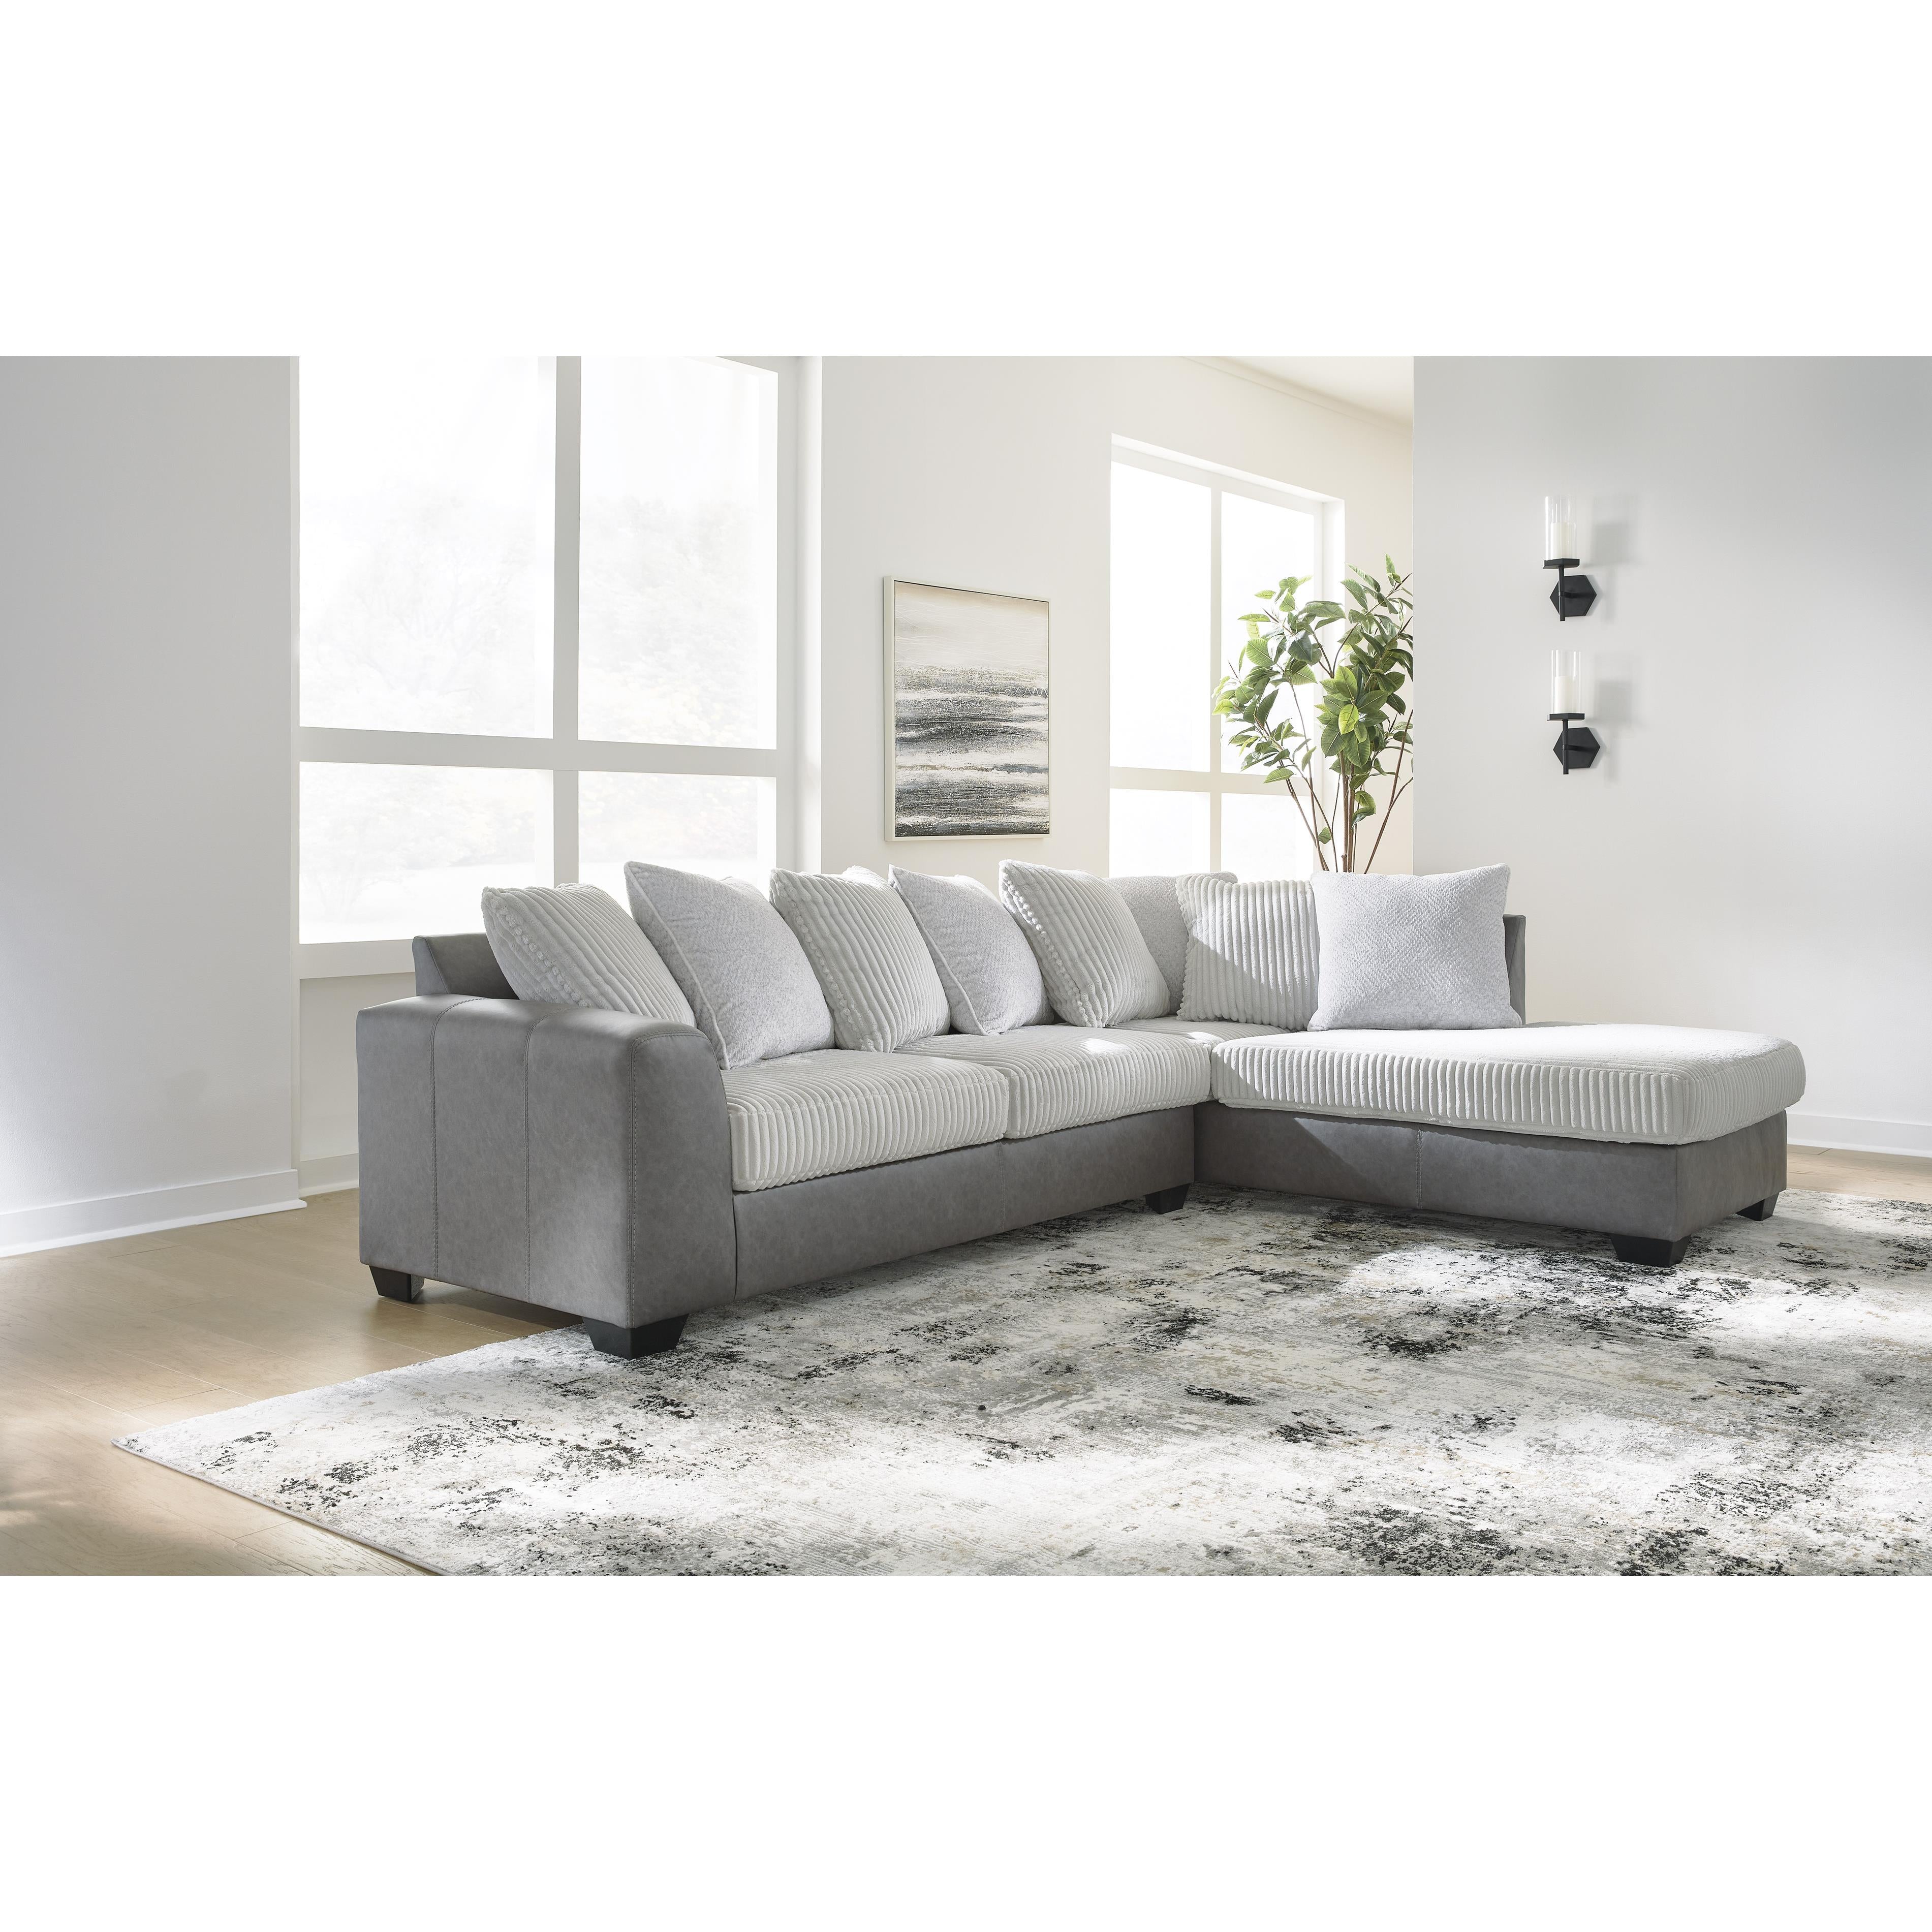 Benchcraft Clairette Court 2 pc Sectional 3150366/3150317 IMAGE 2